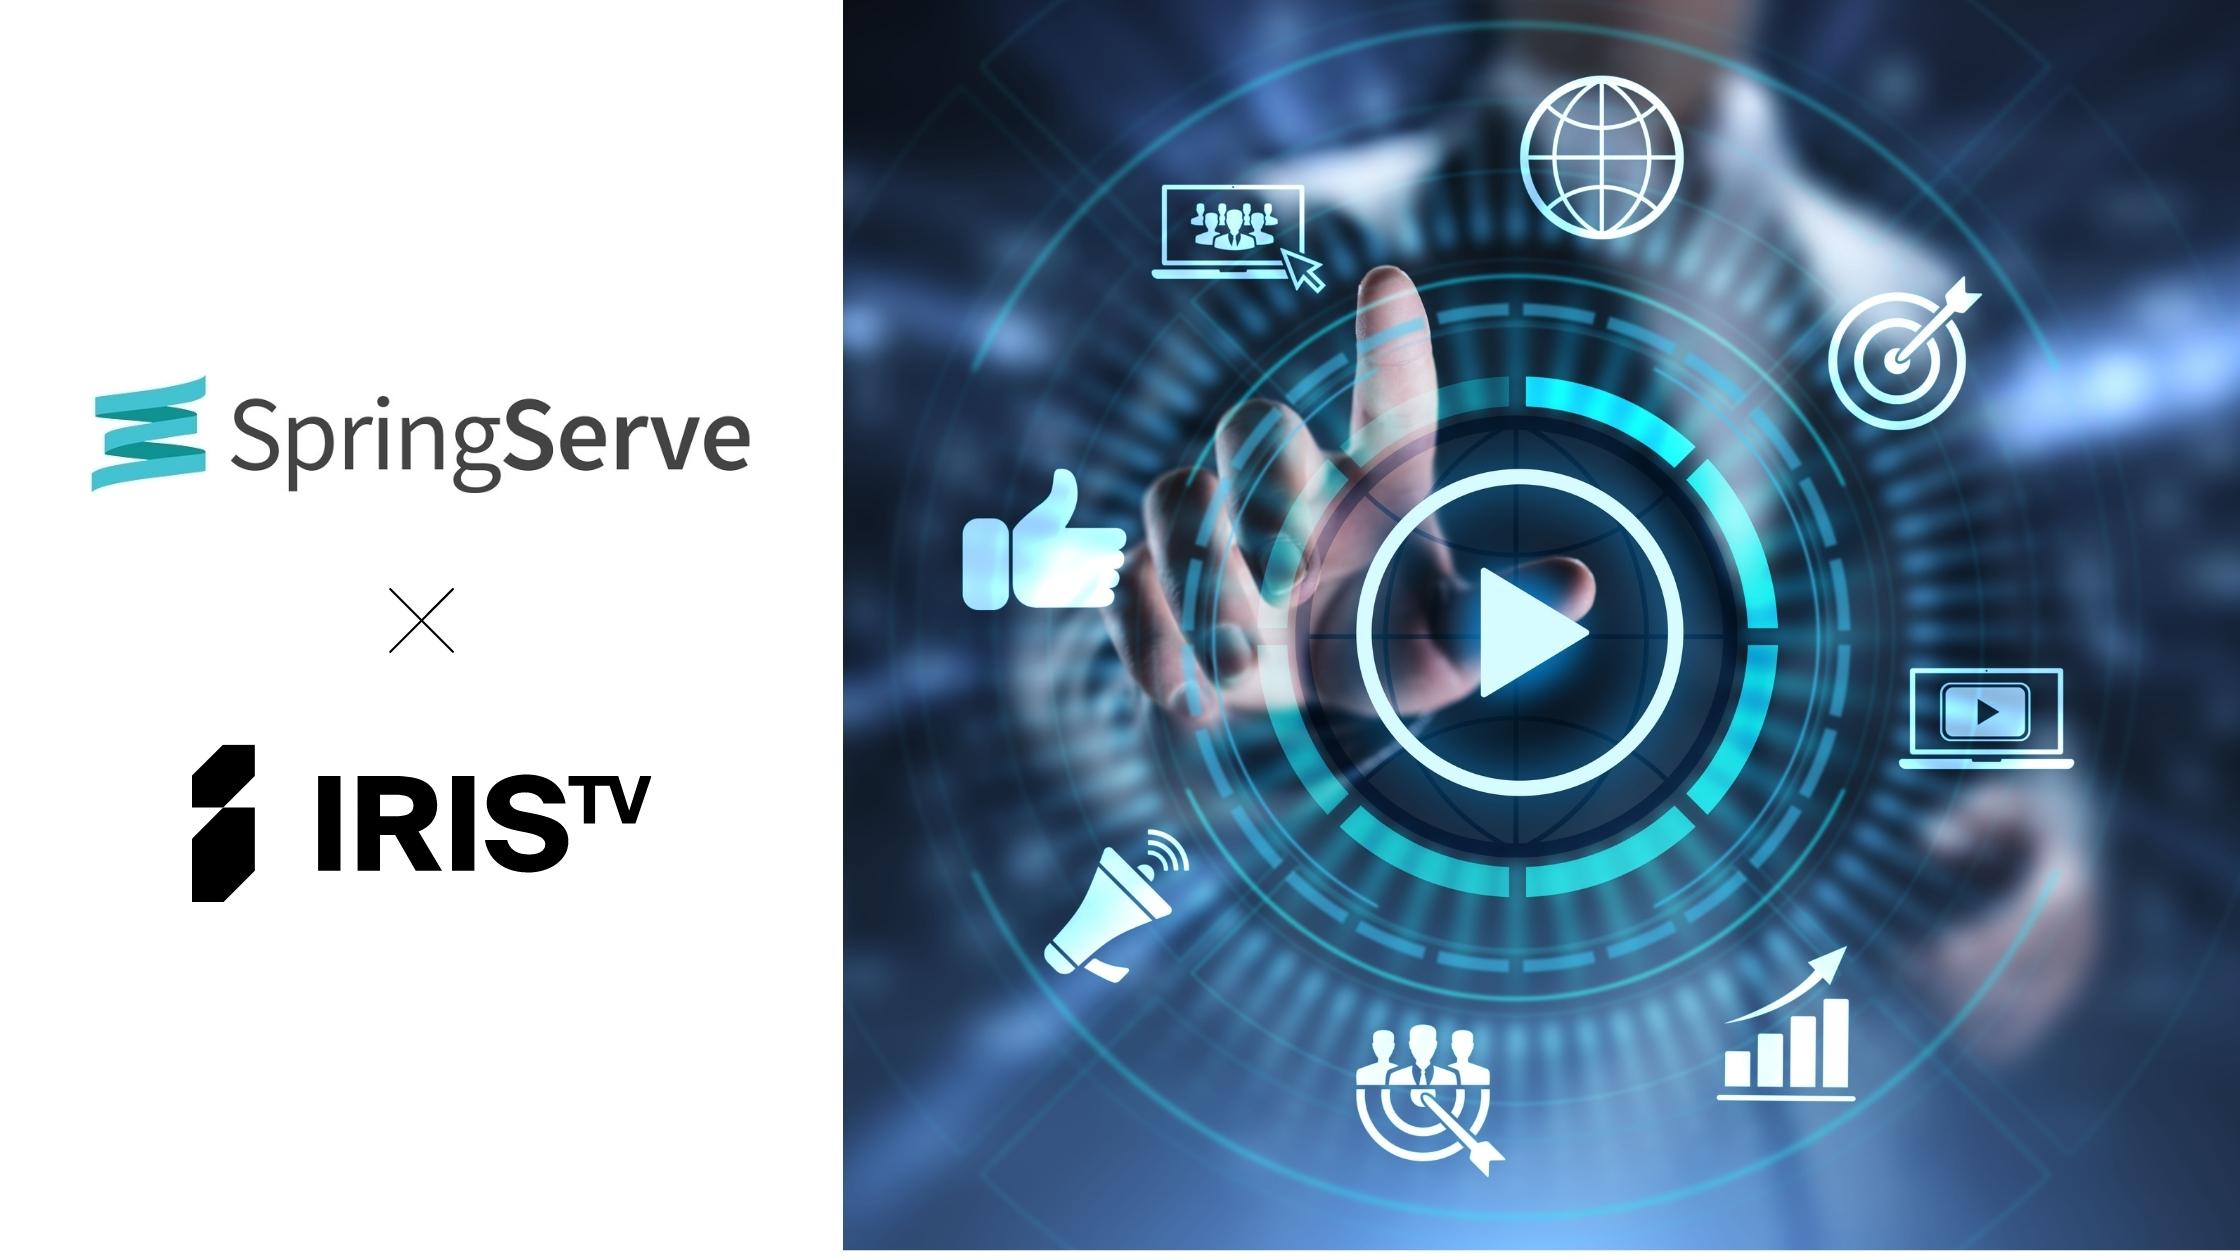 SpringServe integrates IRIS.TV for contextual targeting for direct deals